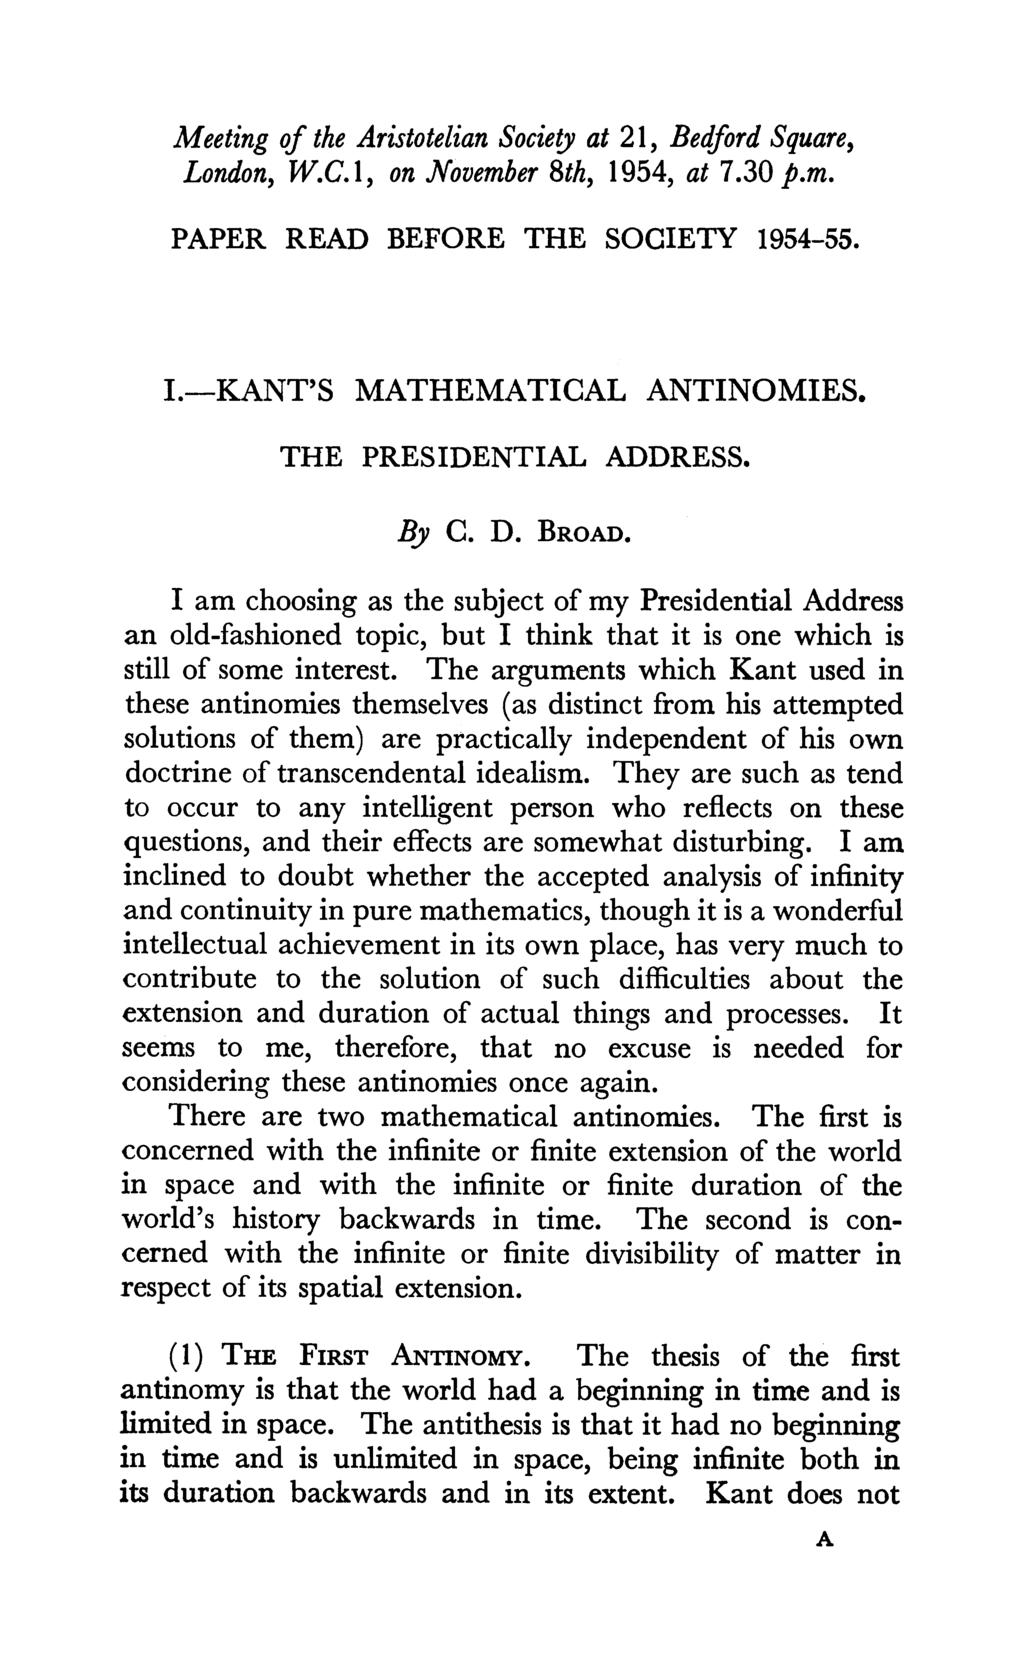 Meeting of the Aristotelian Society at 21, Bedford Square, London, W.C. 1, on November 8th, 1954, at 7.30 p.m. PAPER READ BEFORE THE SOCIETY 1954-55. I.-KANT'S MATHEMATICAL ANTINOMIES.